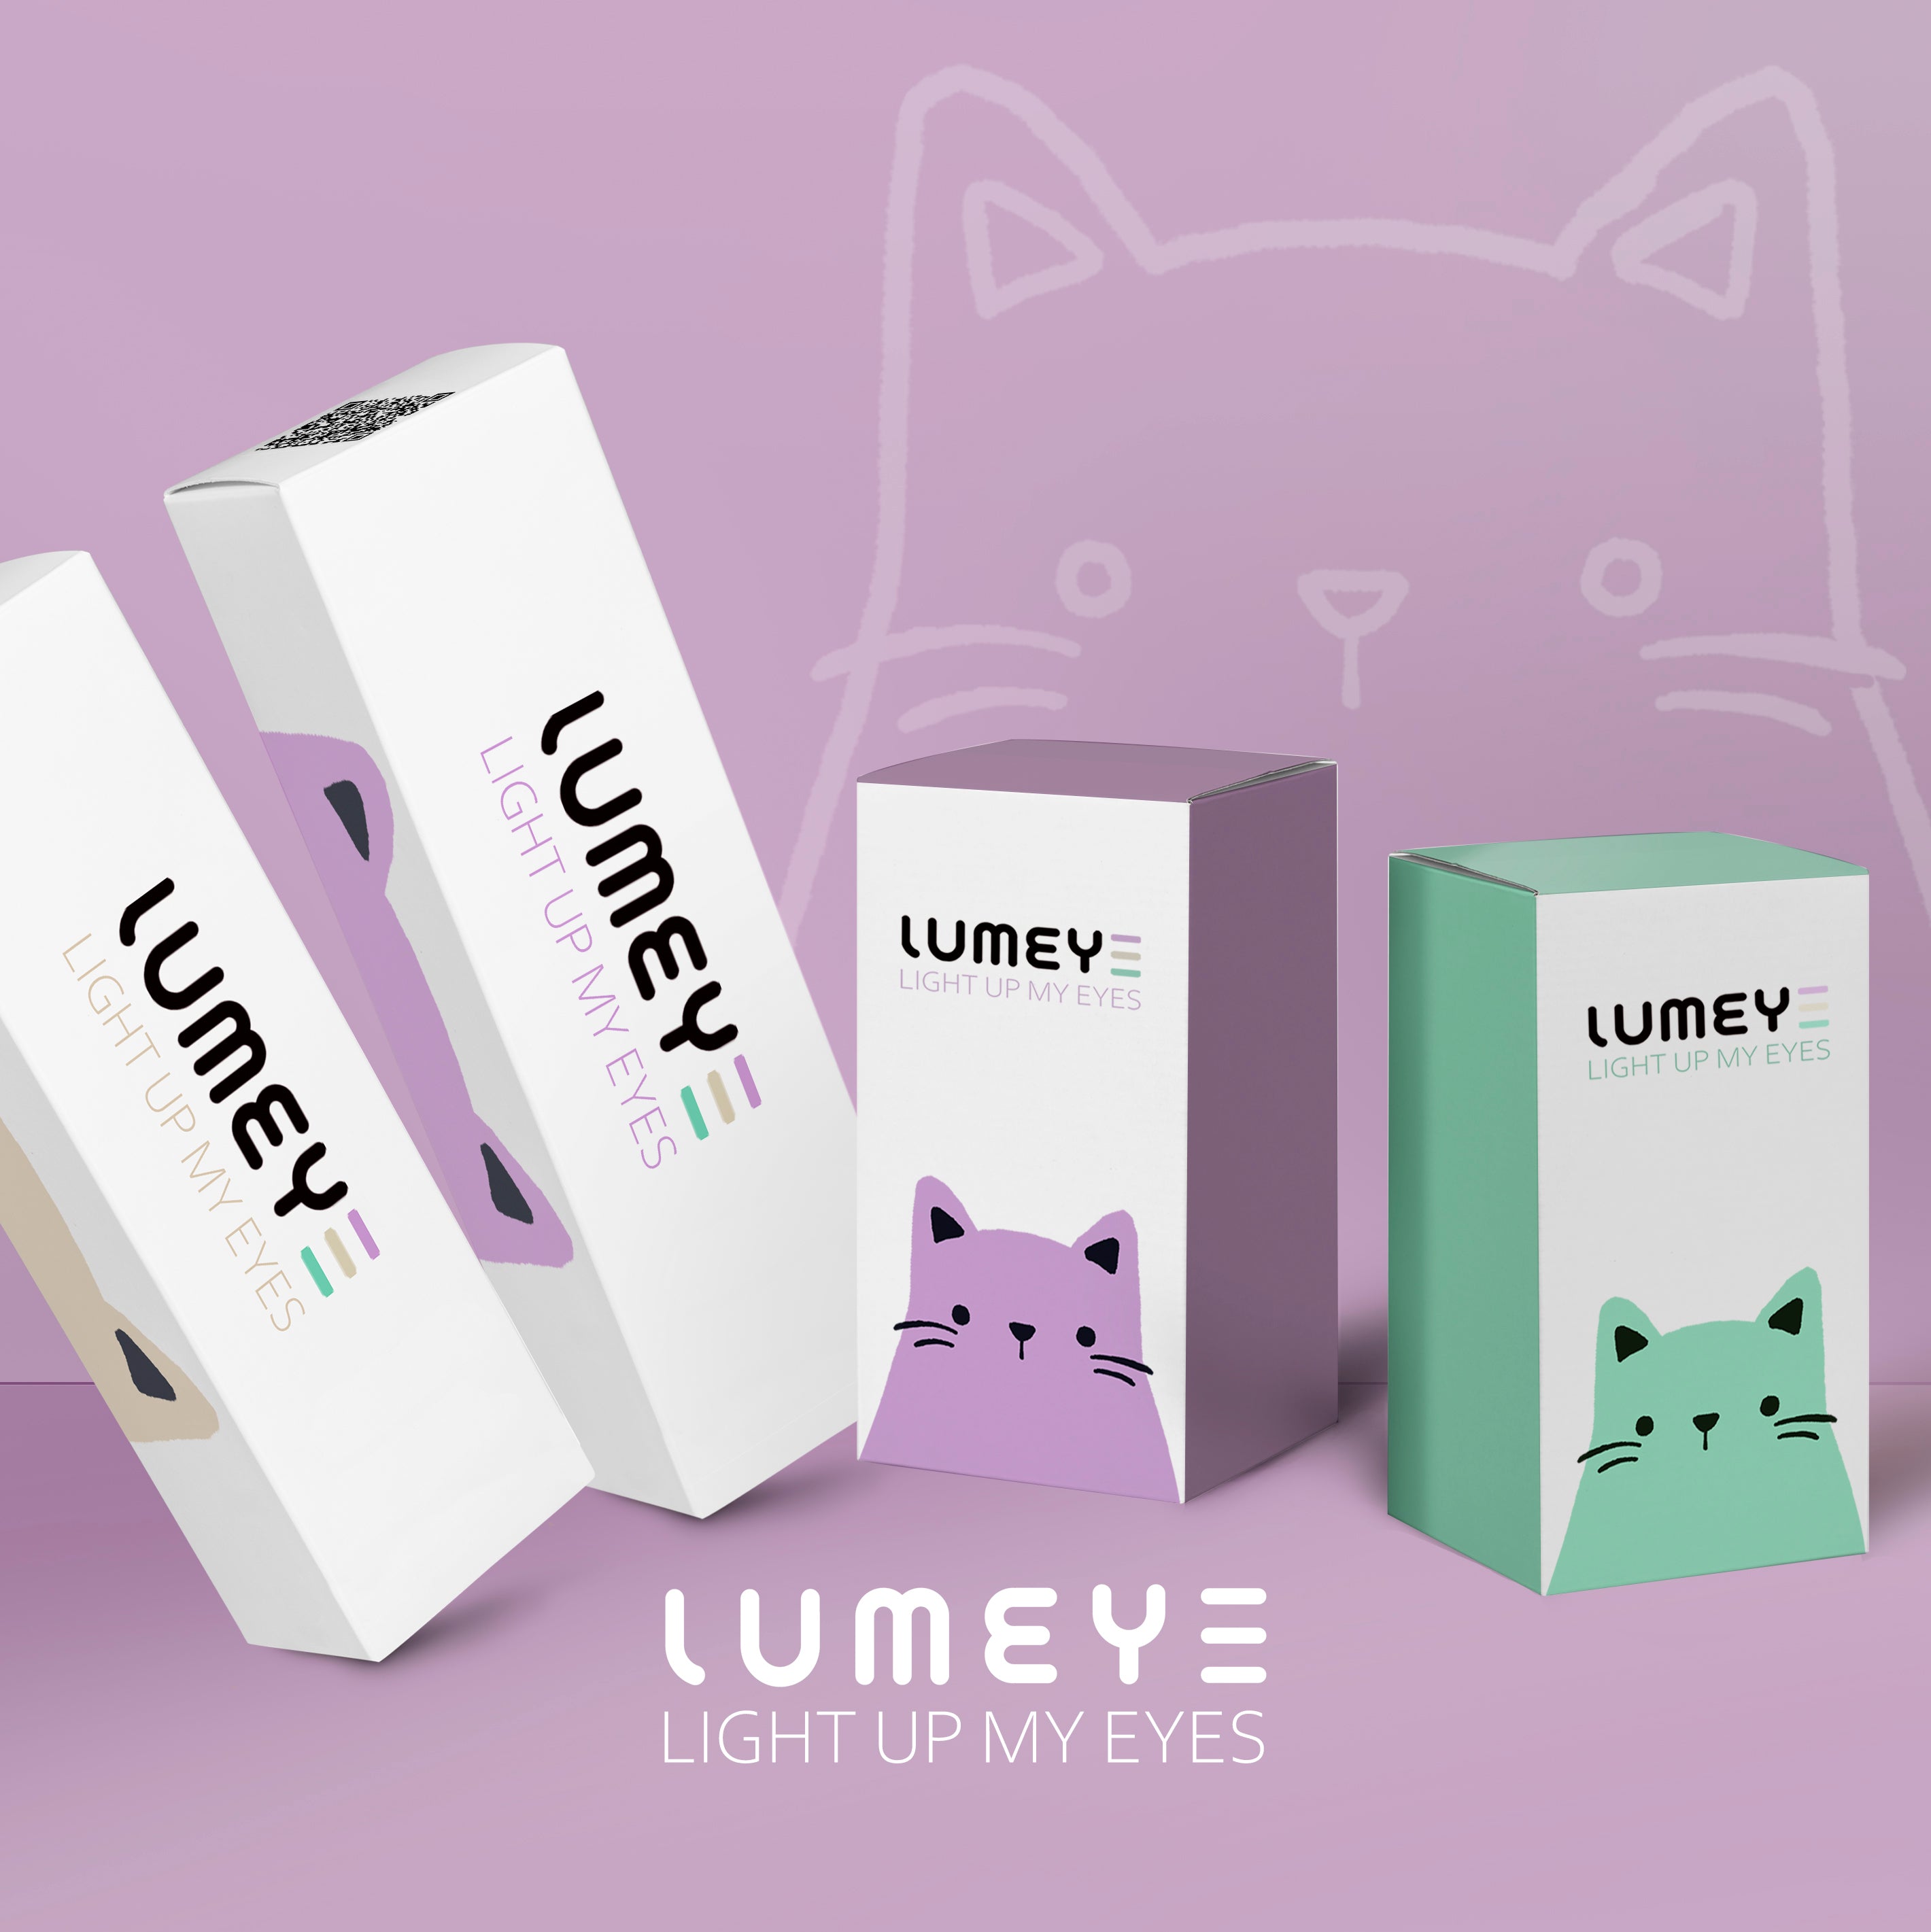 Best COLORED CONTACTS - LUMEYE Pop Star Brown Colored Contact Lenses - LUMEYE